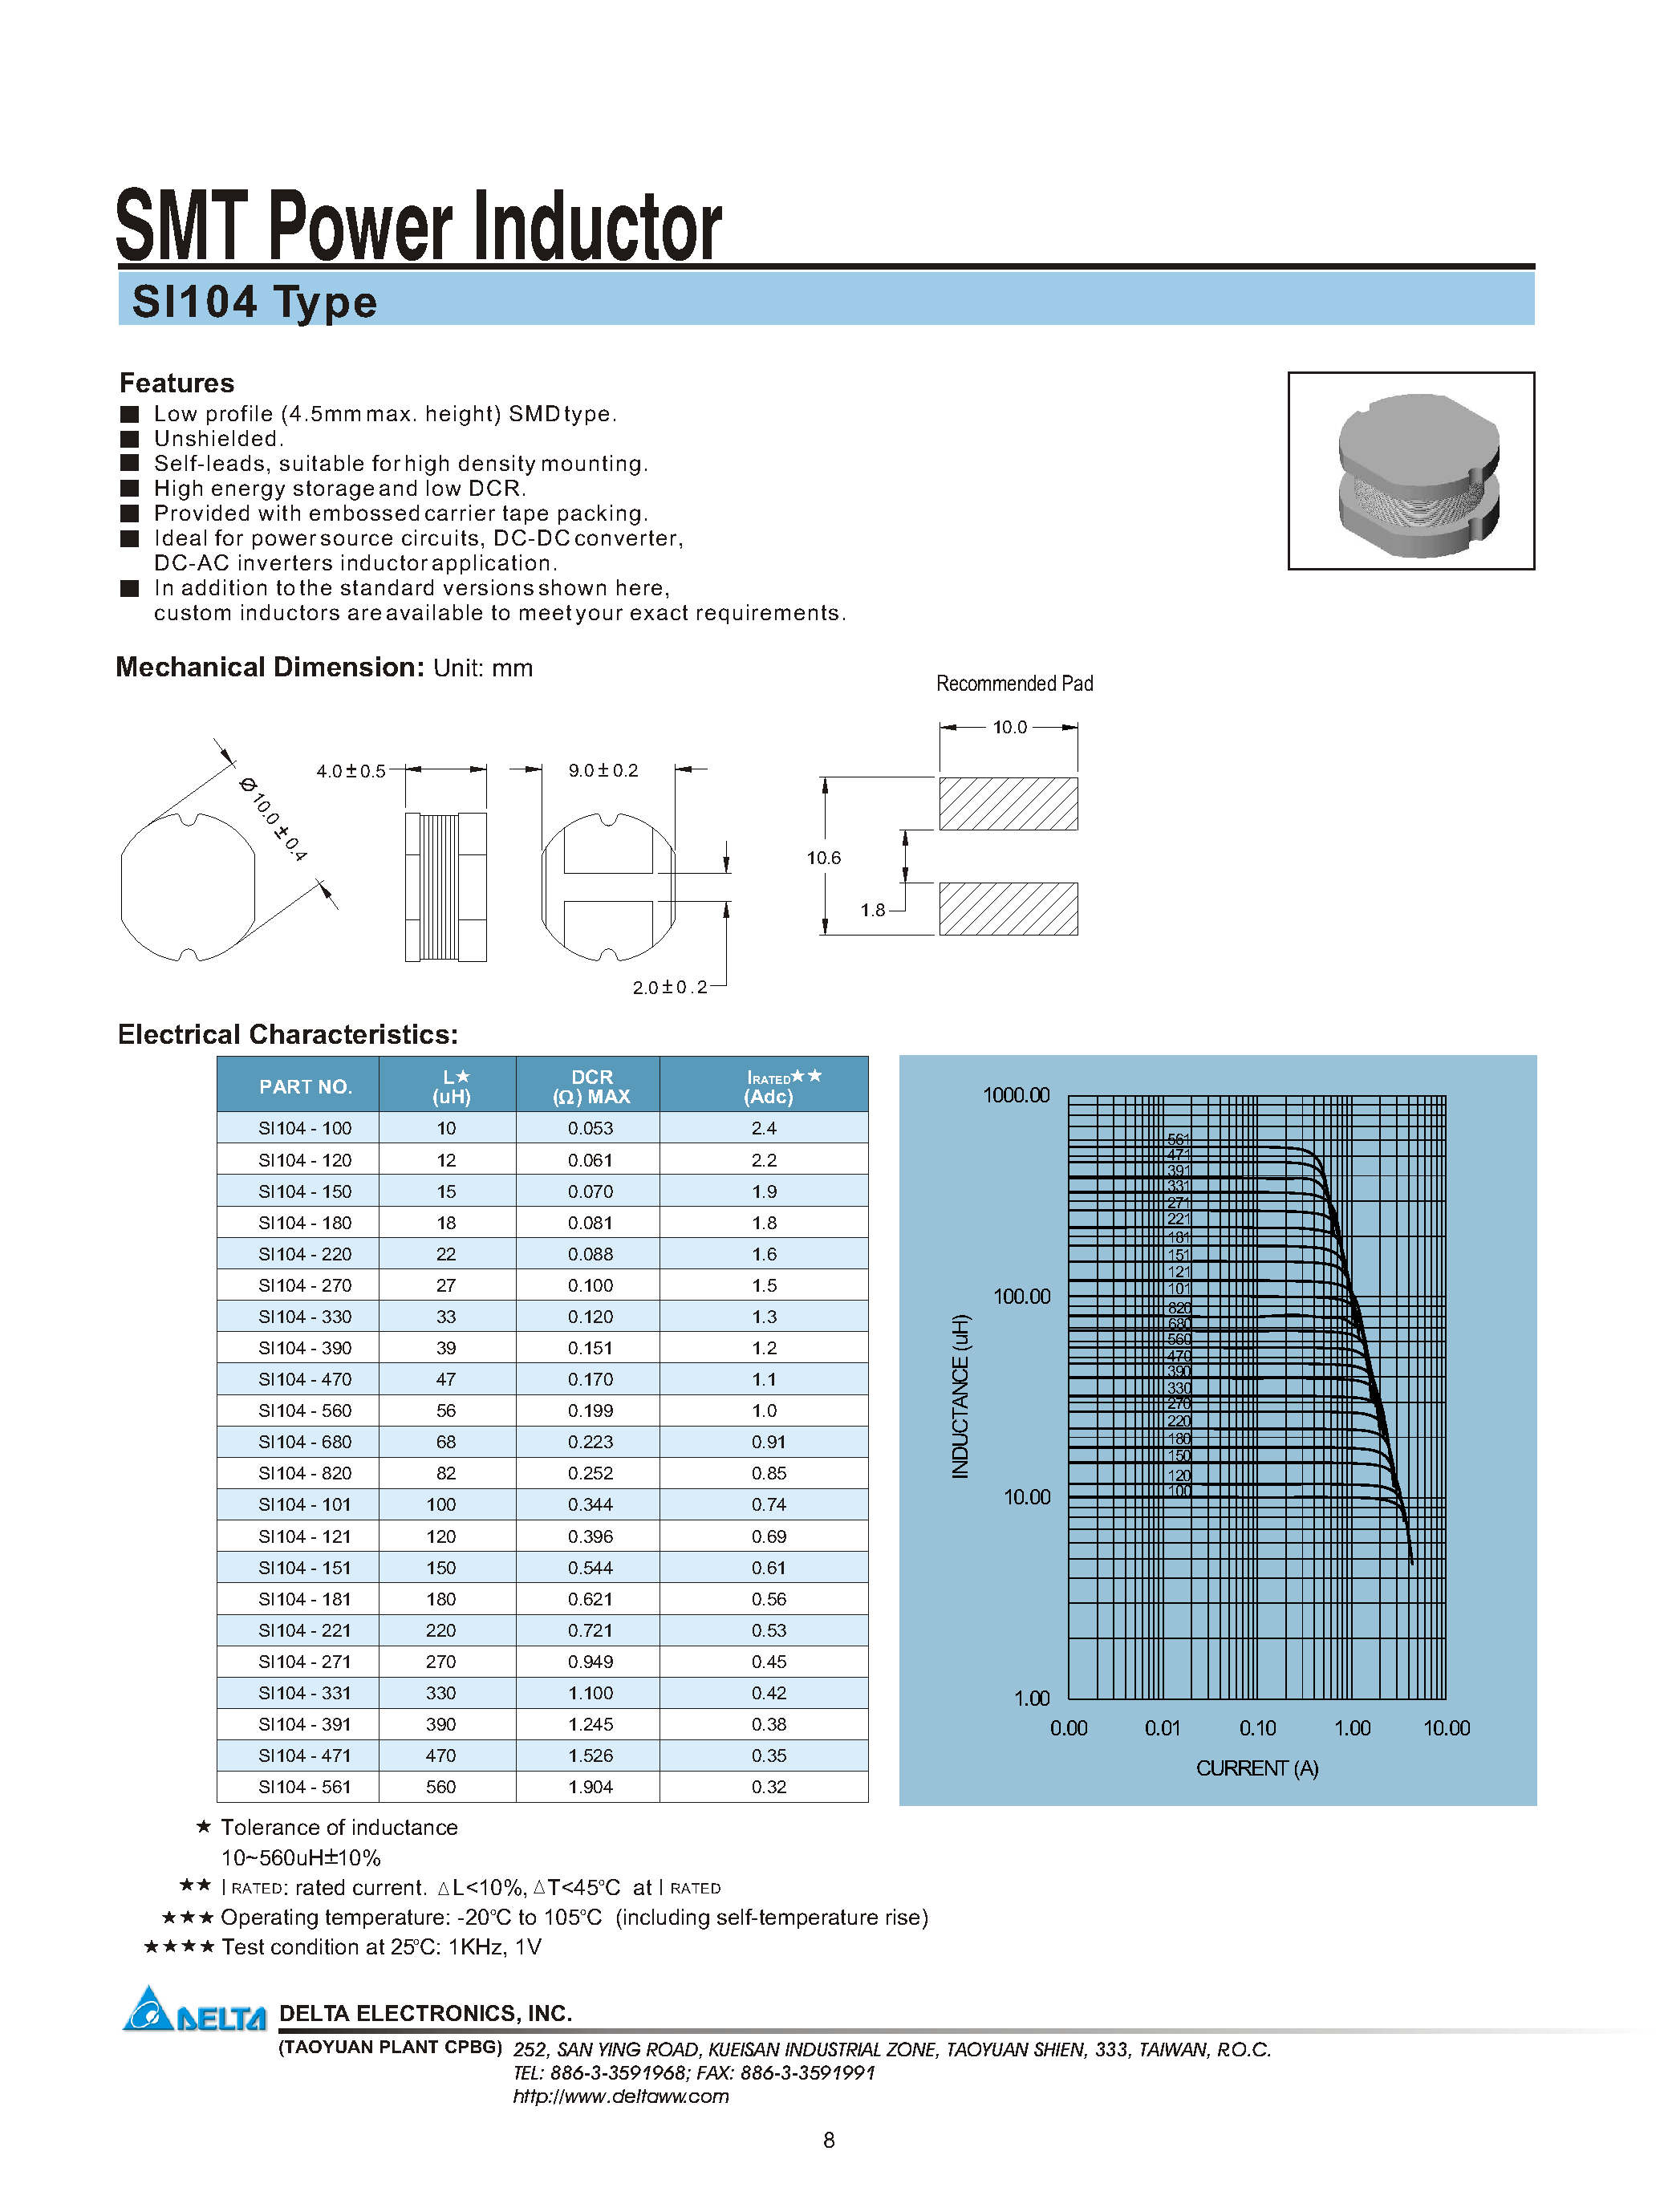 Datasheet SI104-471 - SMT Power Inductor page 1